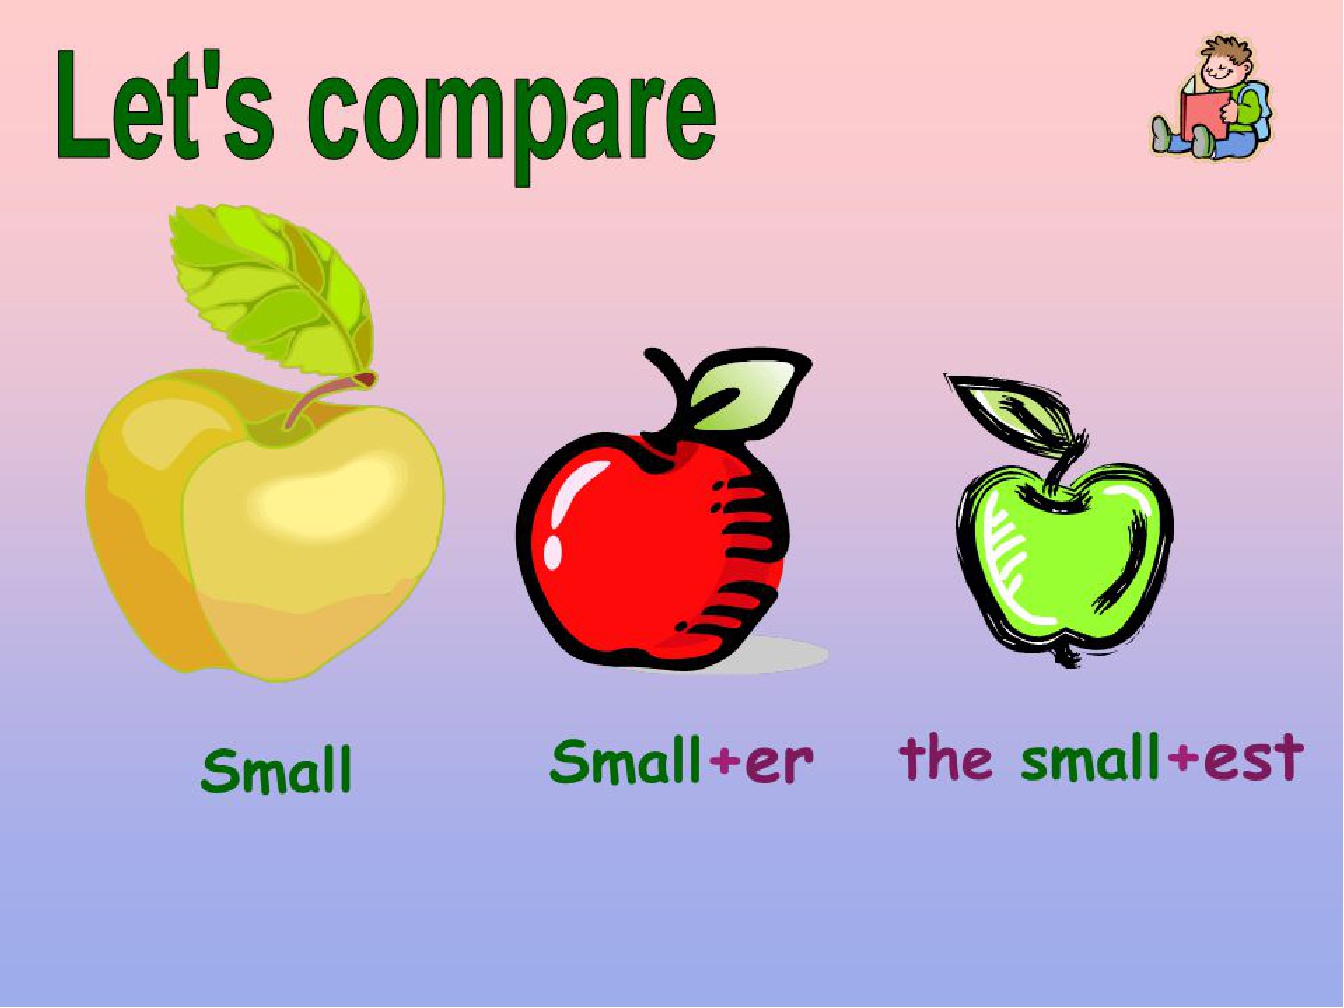 Let object. Degrees of Comparison of adjectives. Comparison of adjectives. Comparison картинка. Degrees of Comparison картинки.